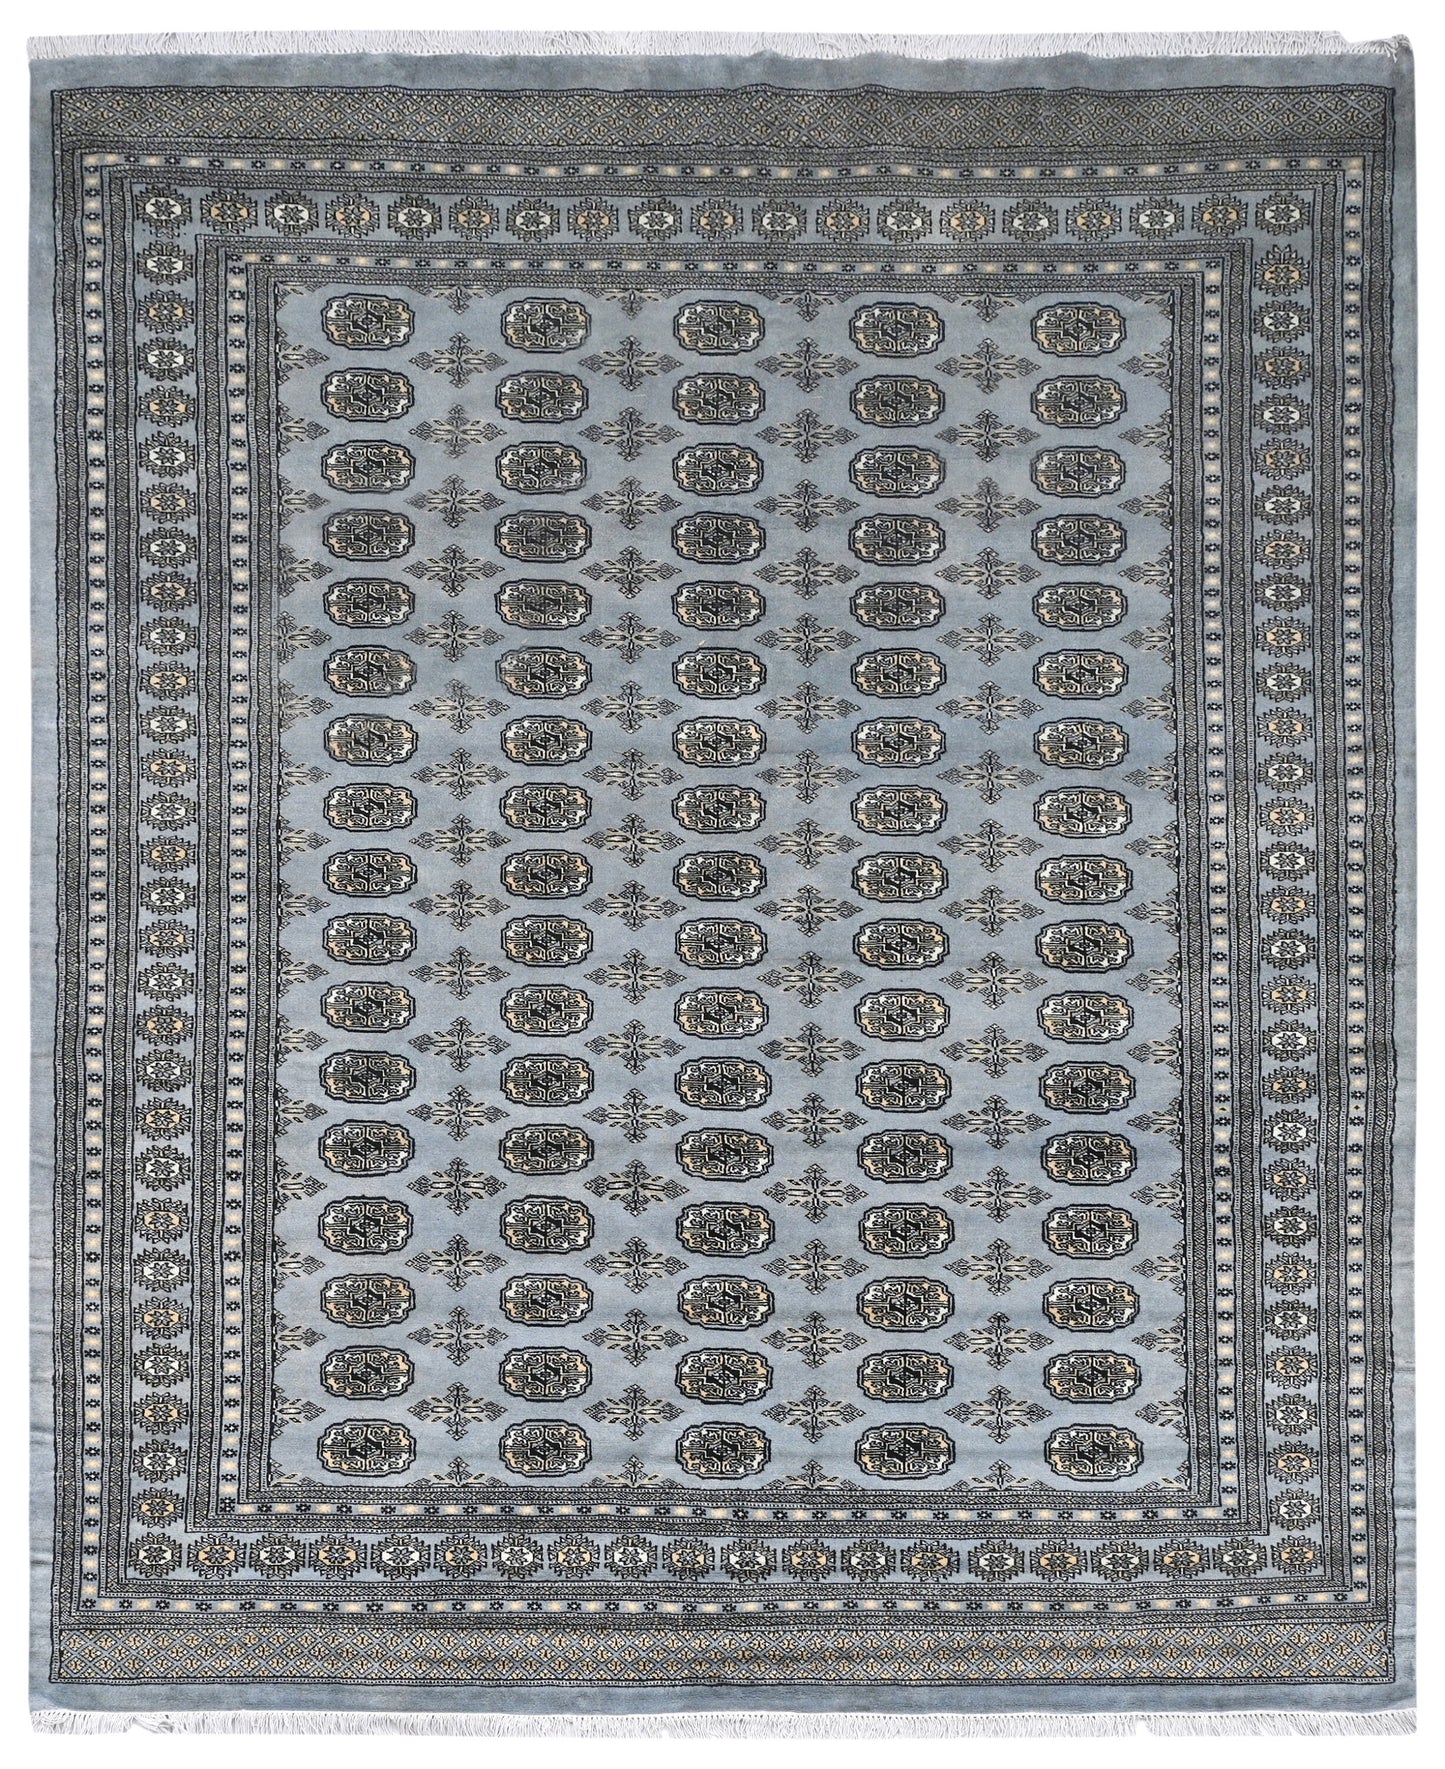 Bokhara Wool Rug | 10' x 8' | Home Decor | Hand-Knotted Area Rug